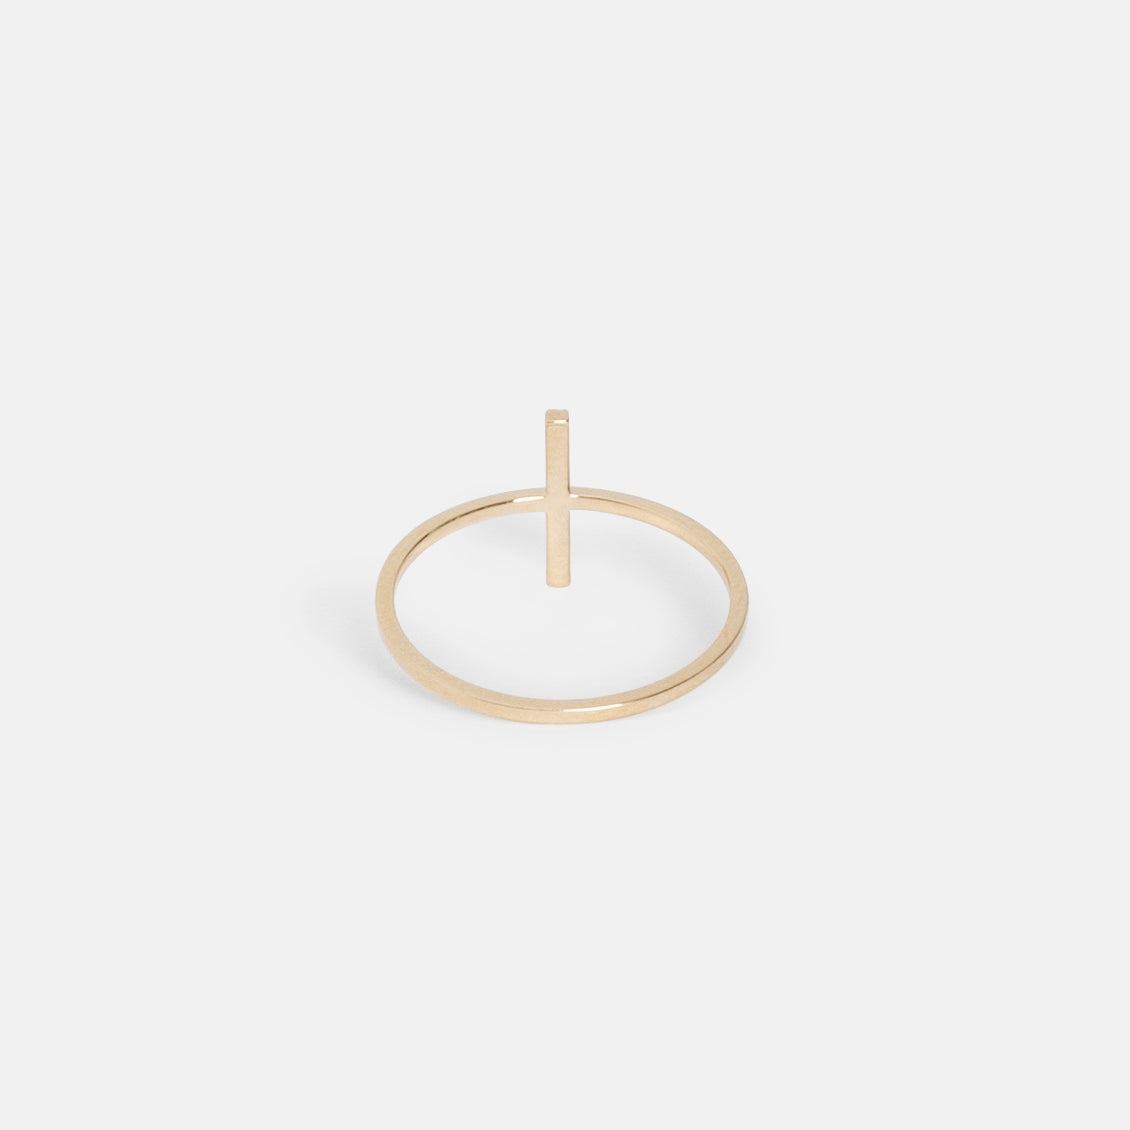 Steva Unconventional Ring in 14k Gold set with White Diamonds by SHW Fine Jewelry